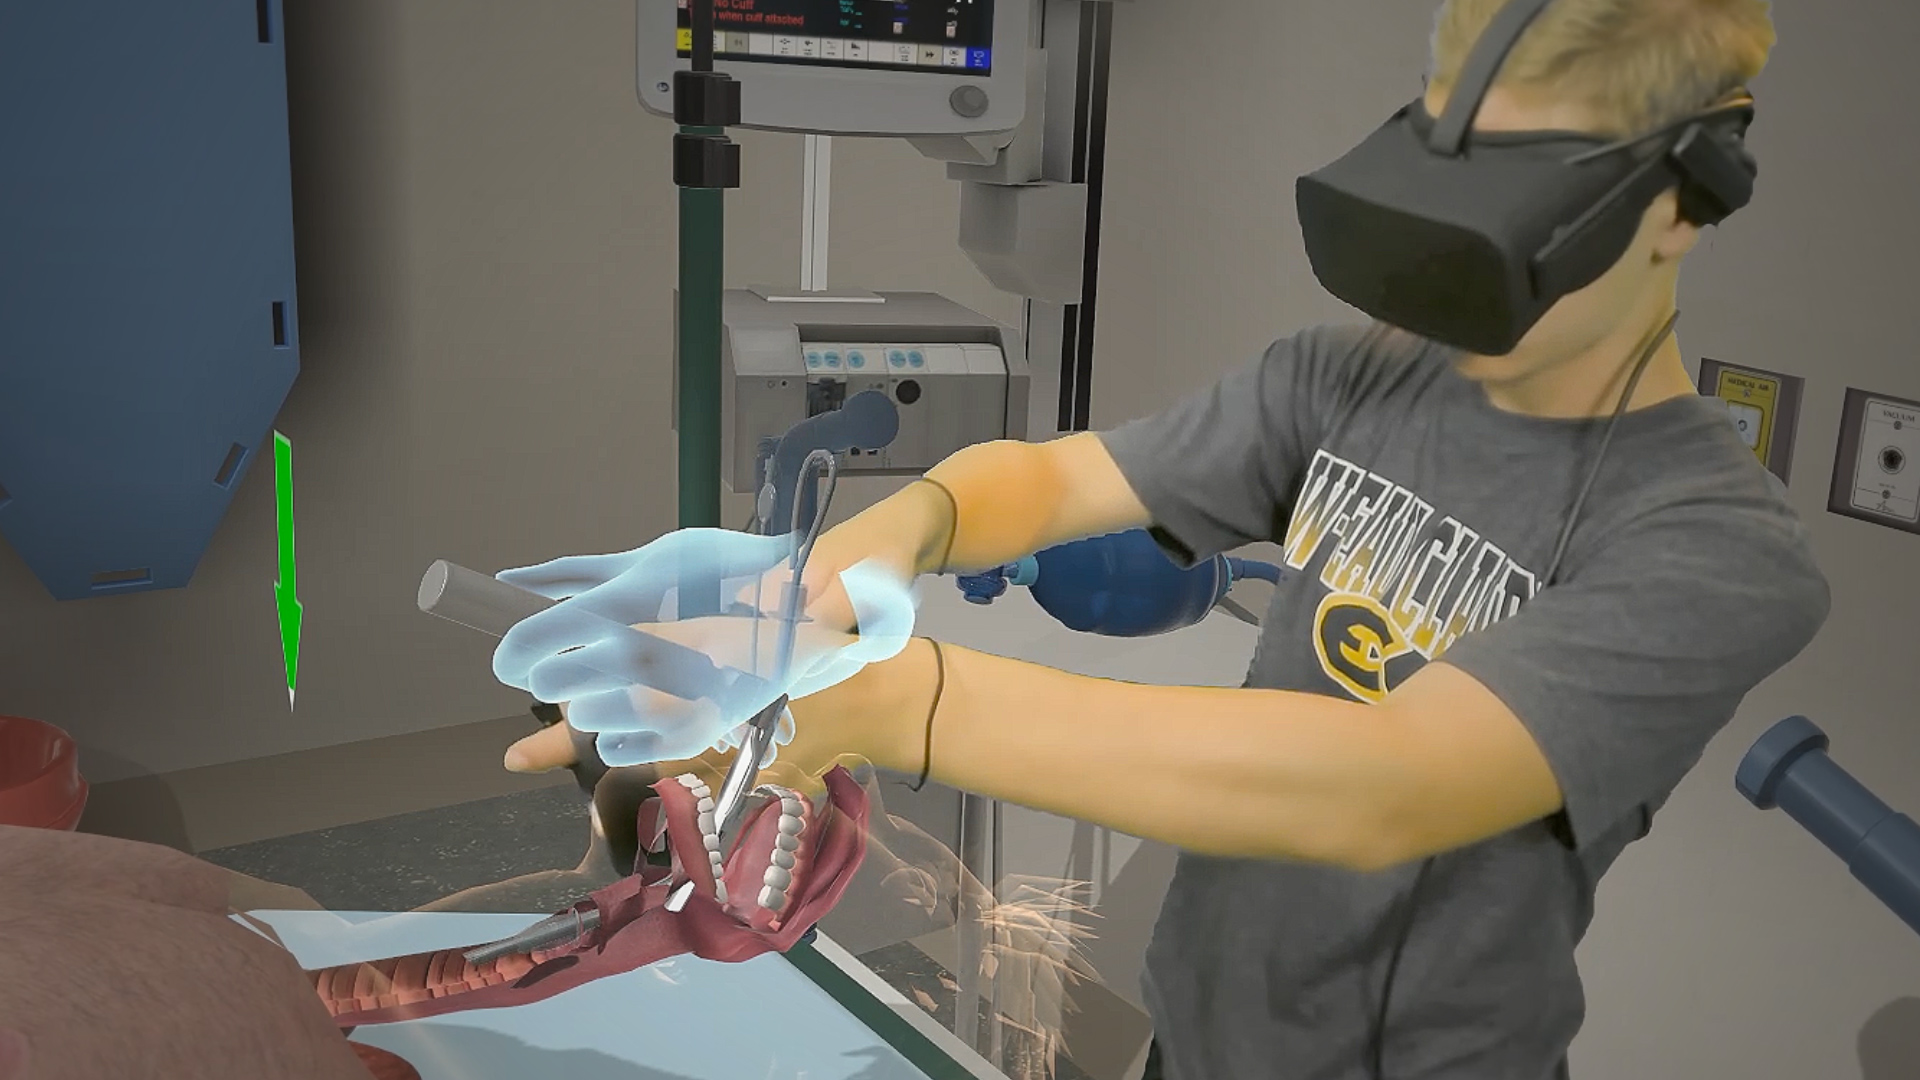 vr training for medical and healthcare